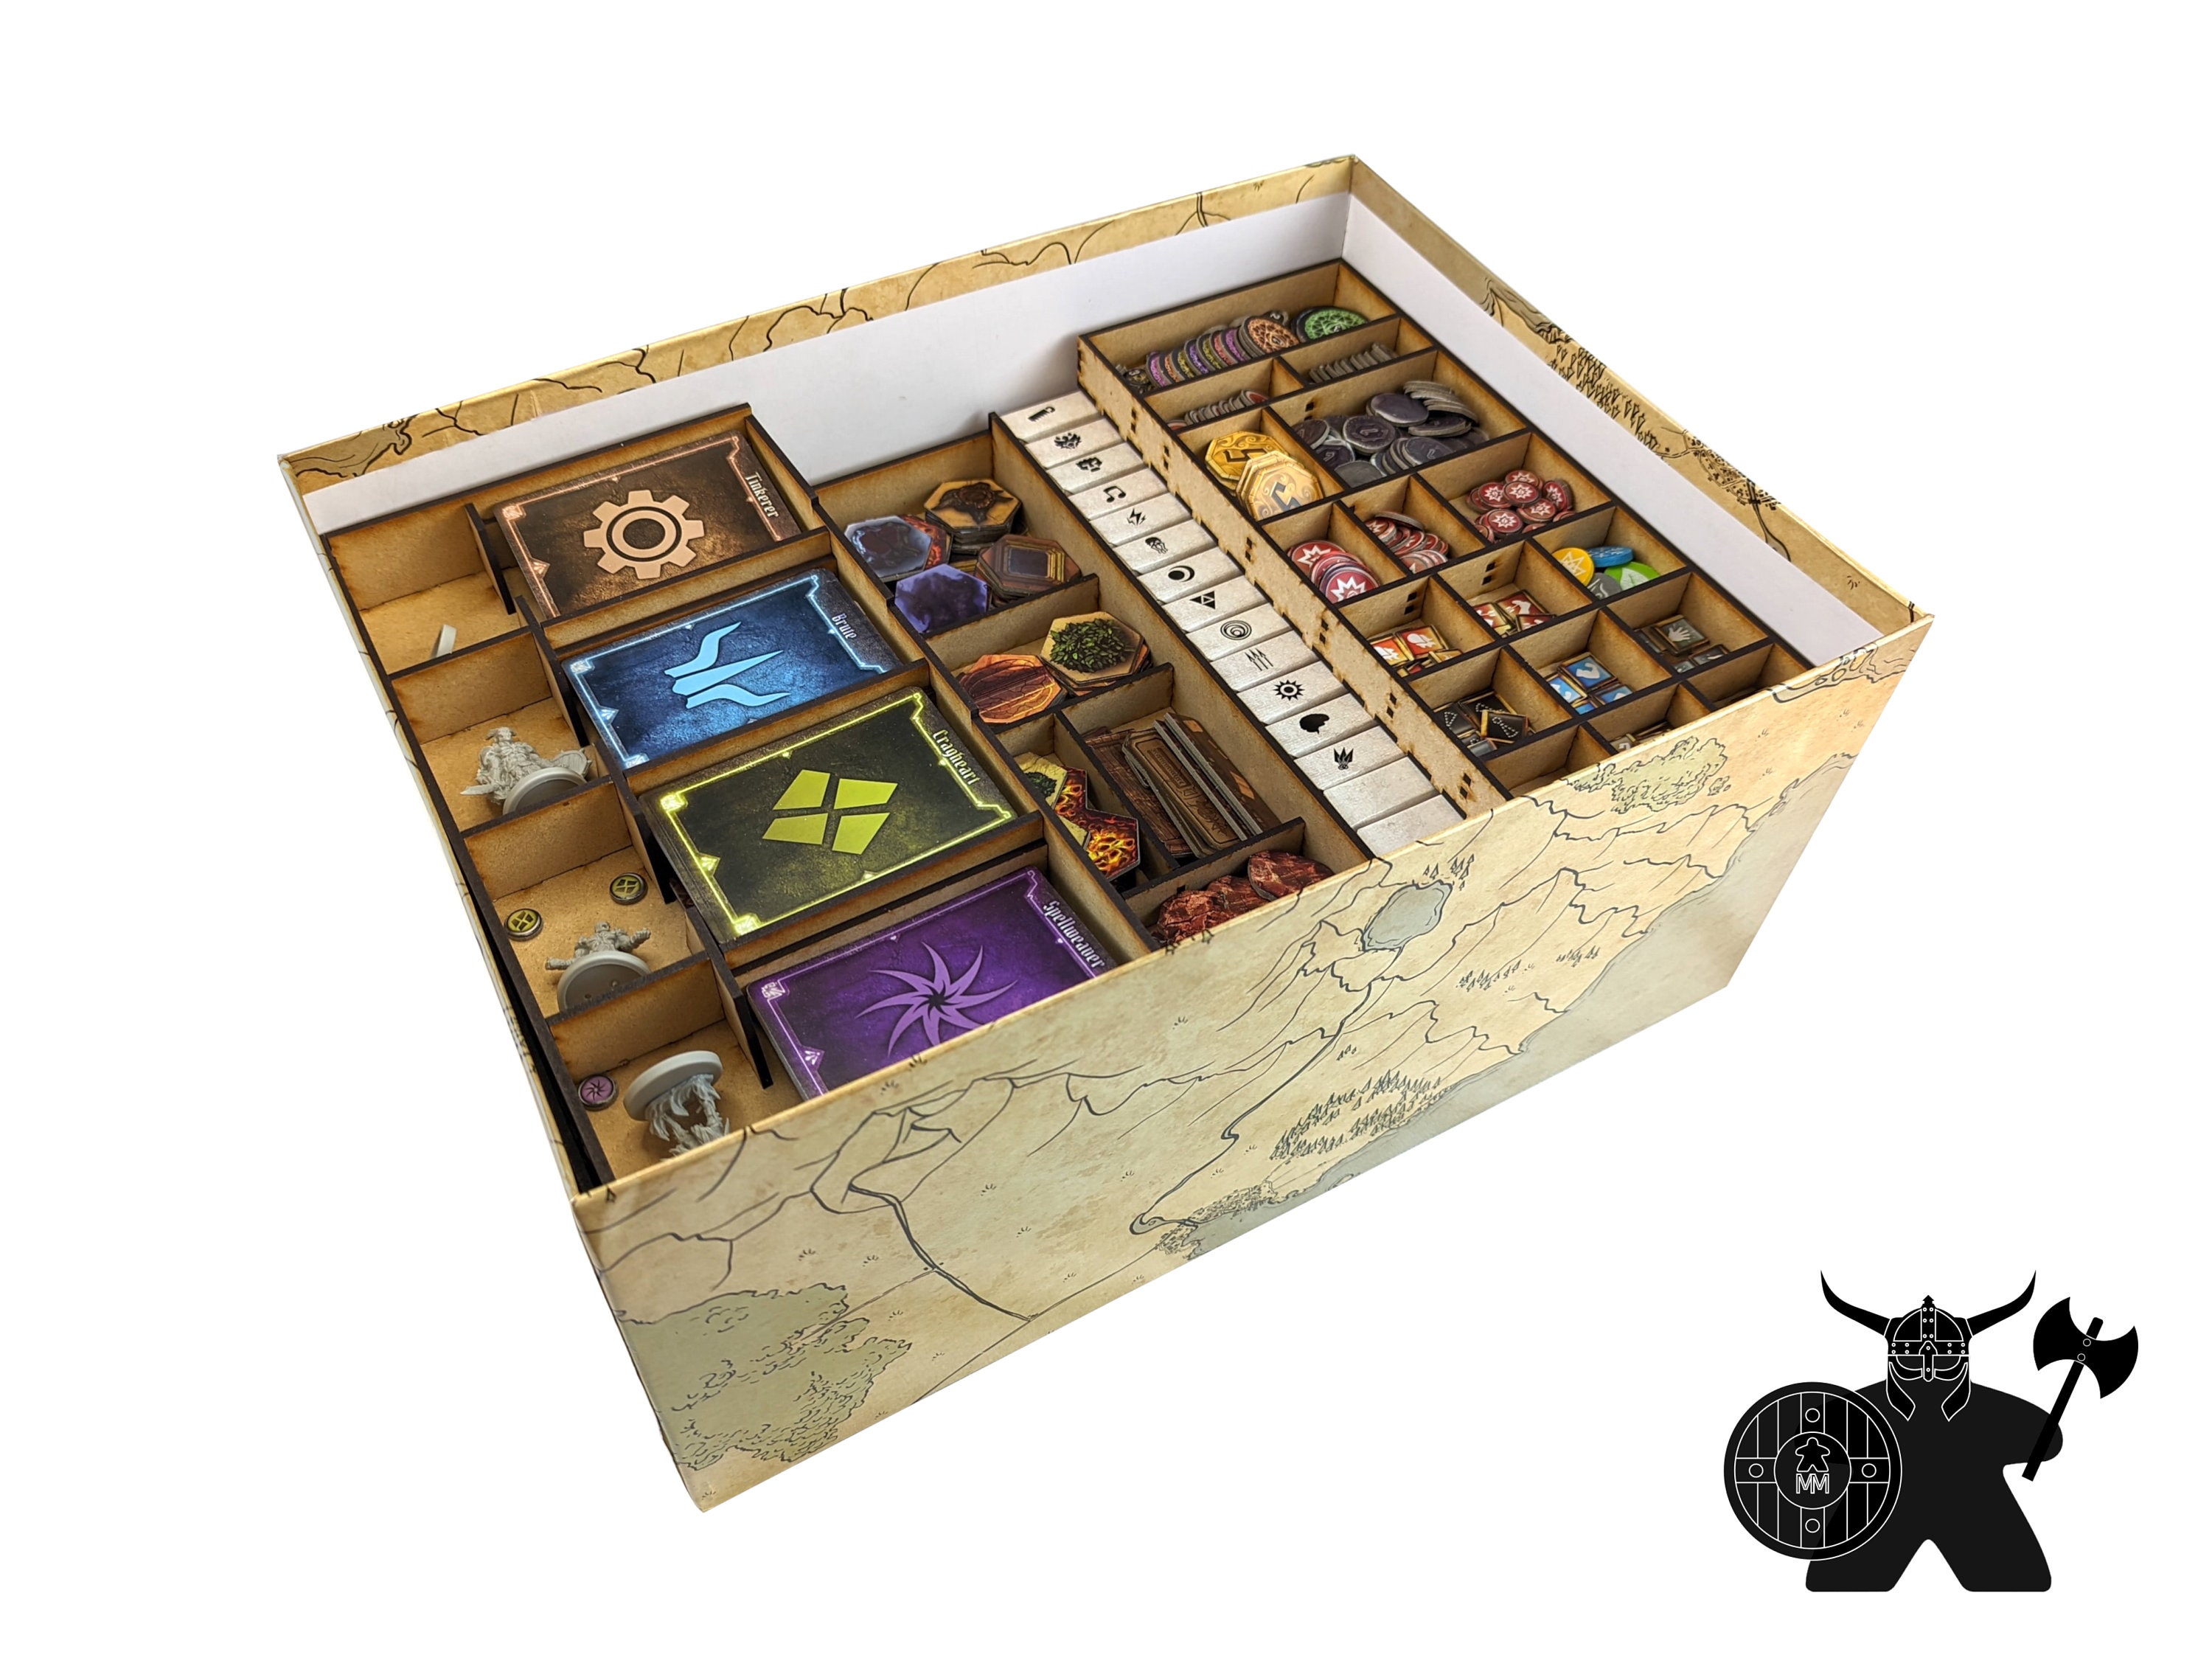 Upgrade for the Gloomhaven Organizer From Towerrex With Forgotten Circles,  Wooden Insert for Gloomhaven, Storage Solution for Gloomhaven 